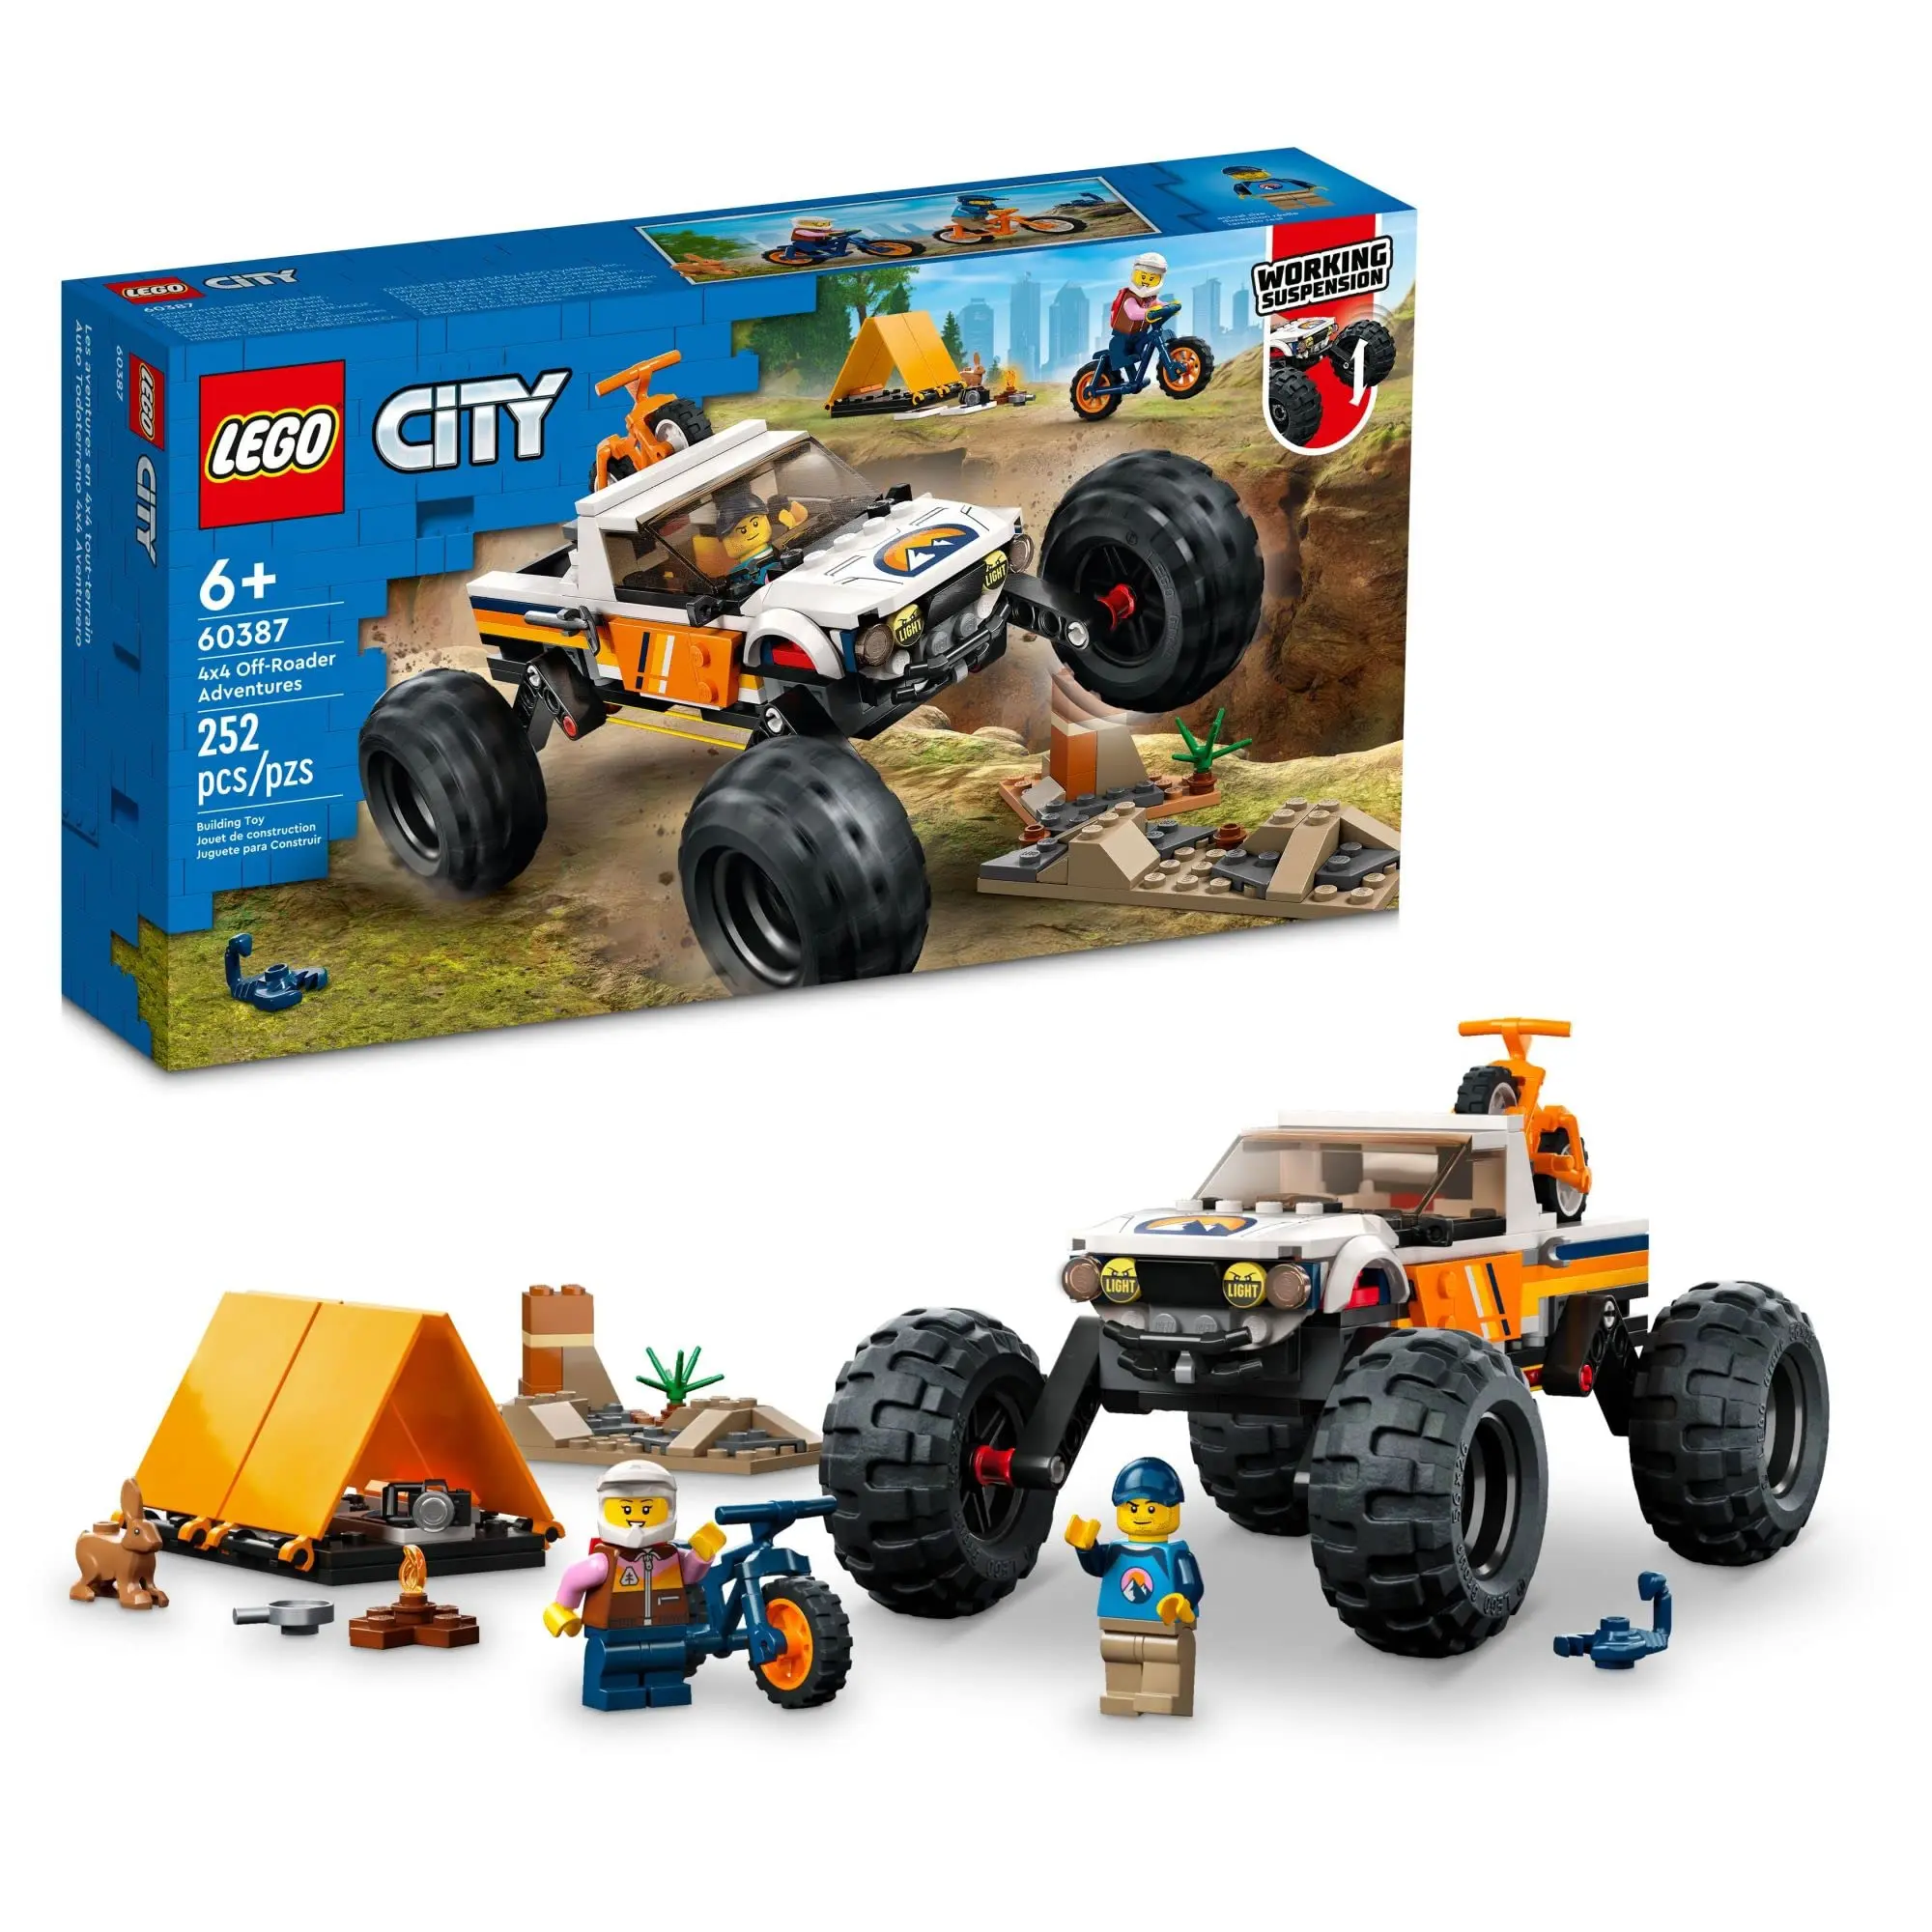 

LEGO City 4x4 Off-Roader Adventures 60387 Camping Set Monster Truck Car Toy with Working Suspension Mountain Bikes Vehicle Kids